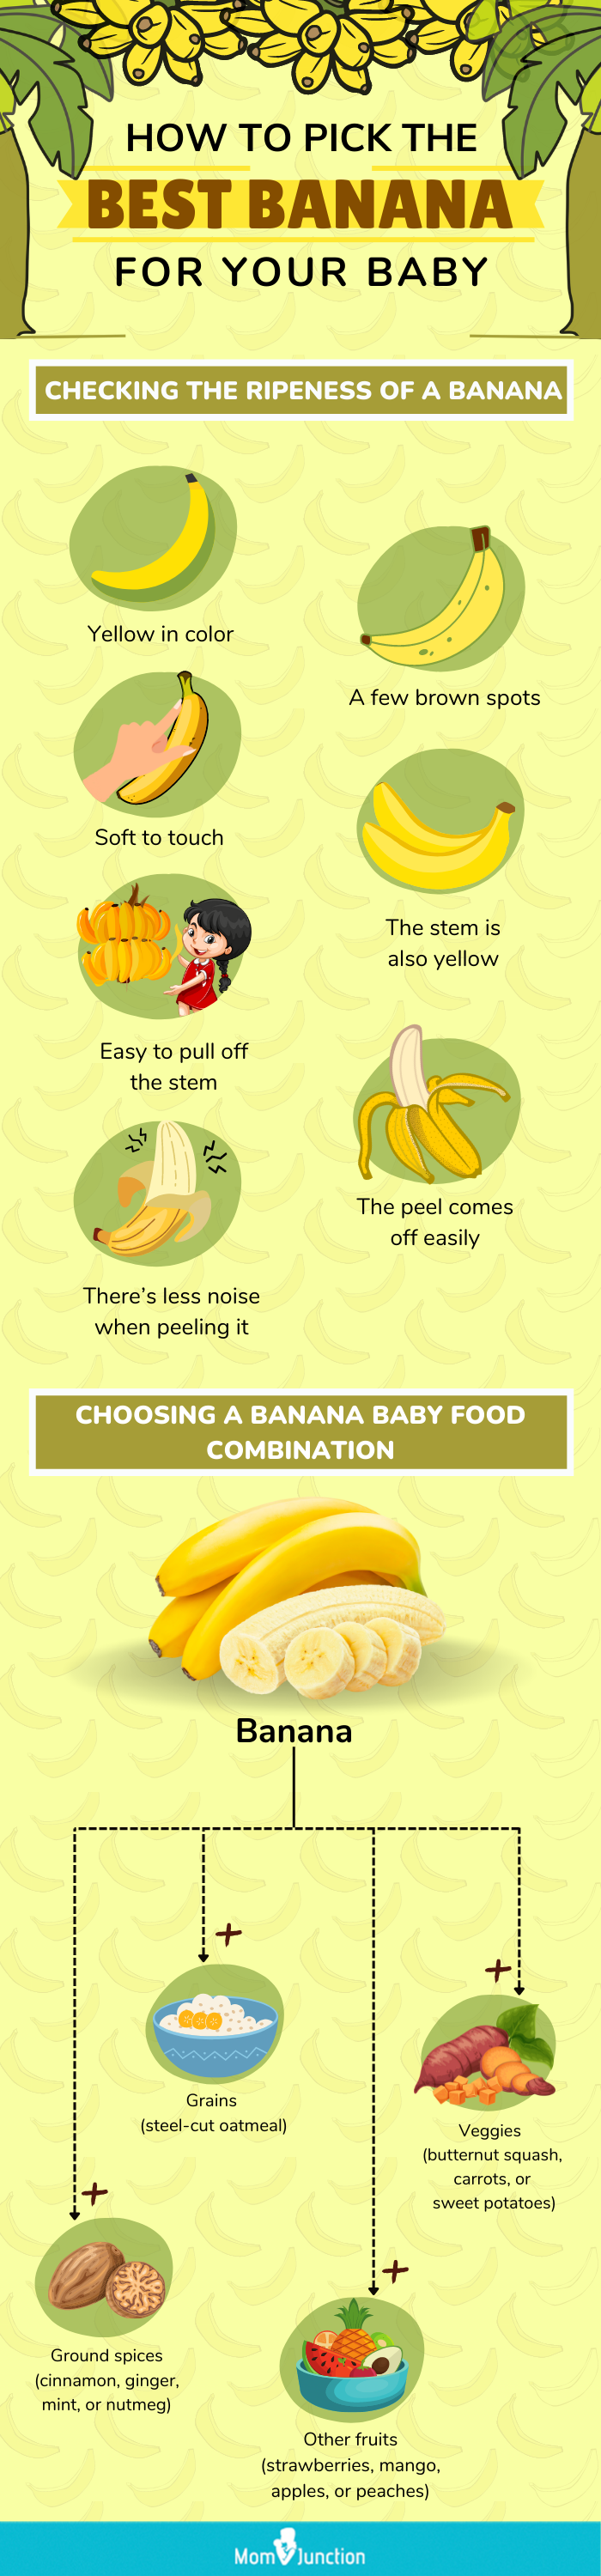 how to pick the best banana for your baby (infographic)